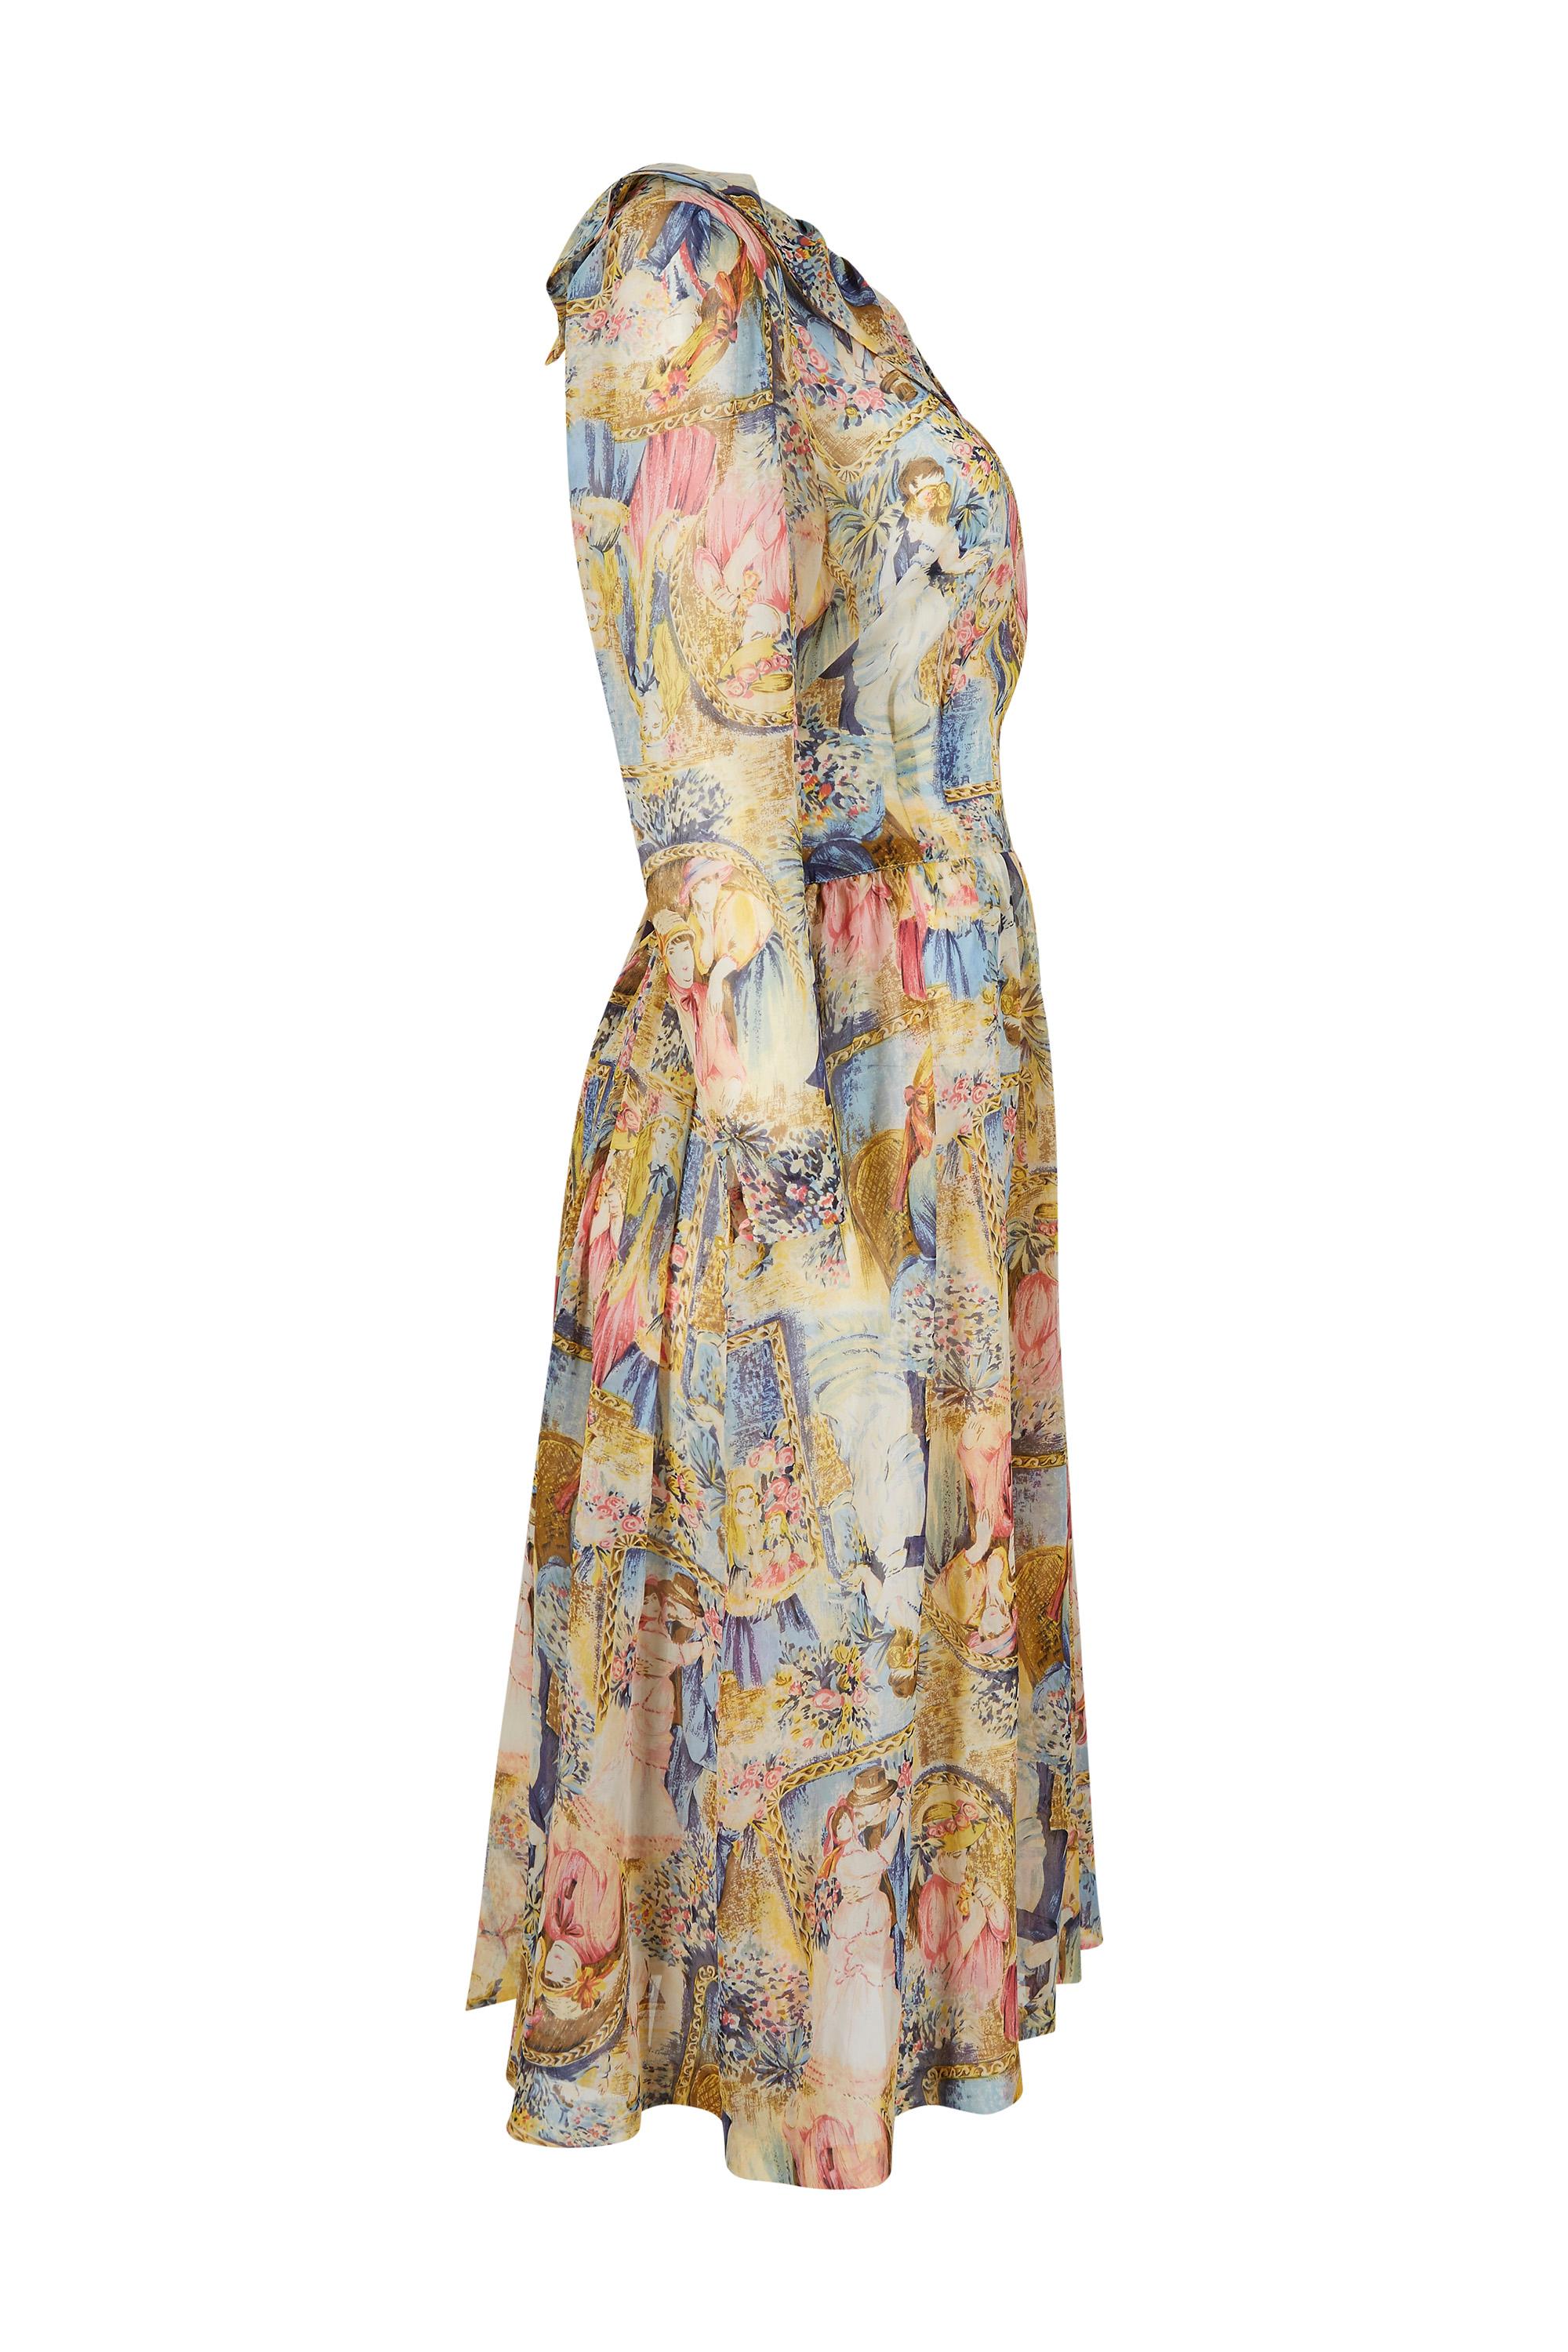 This charming 1970s printed chiffon dress is unlabelled however it is exceptionally pretty with a unique novelty print depicting romantic images of wistful young girls and courting lovers amidst floral settings. The colours are soft pastel shades of